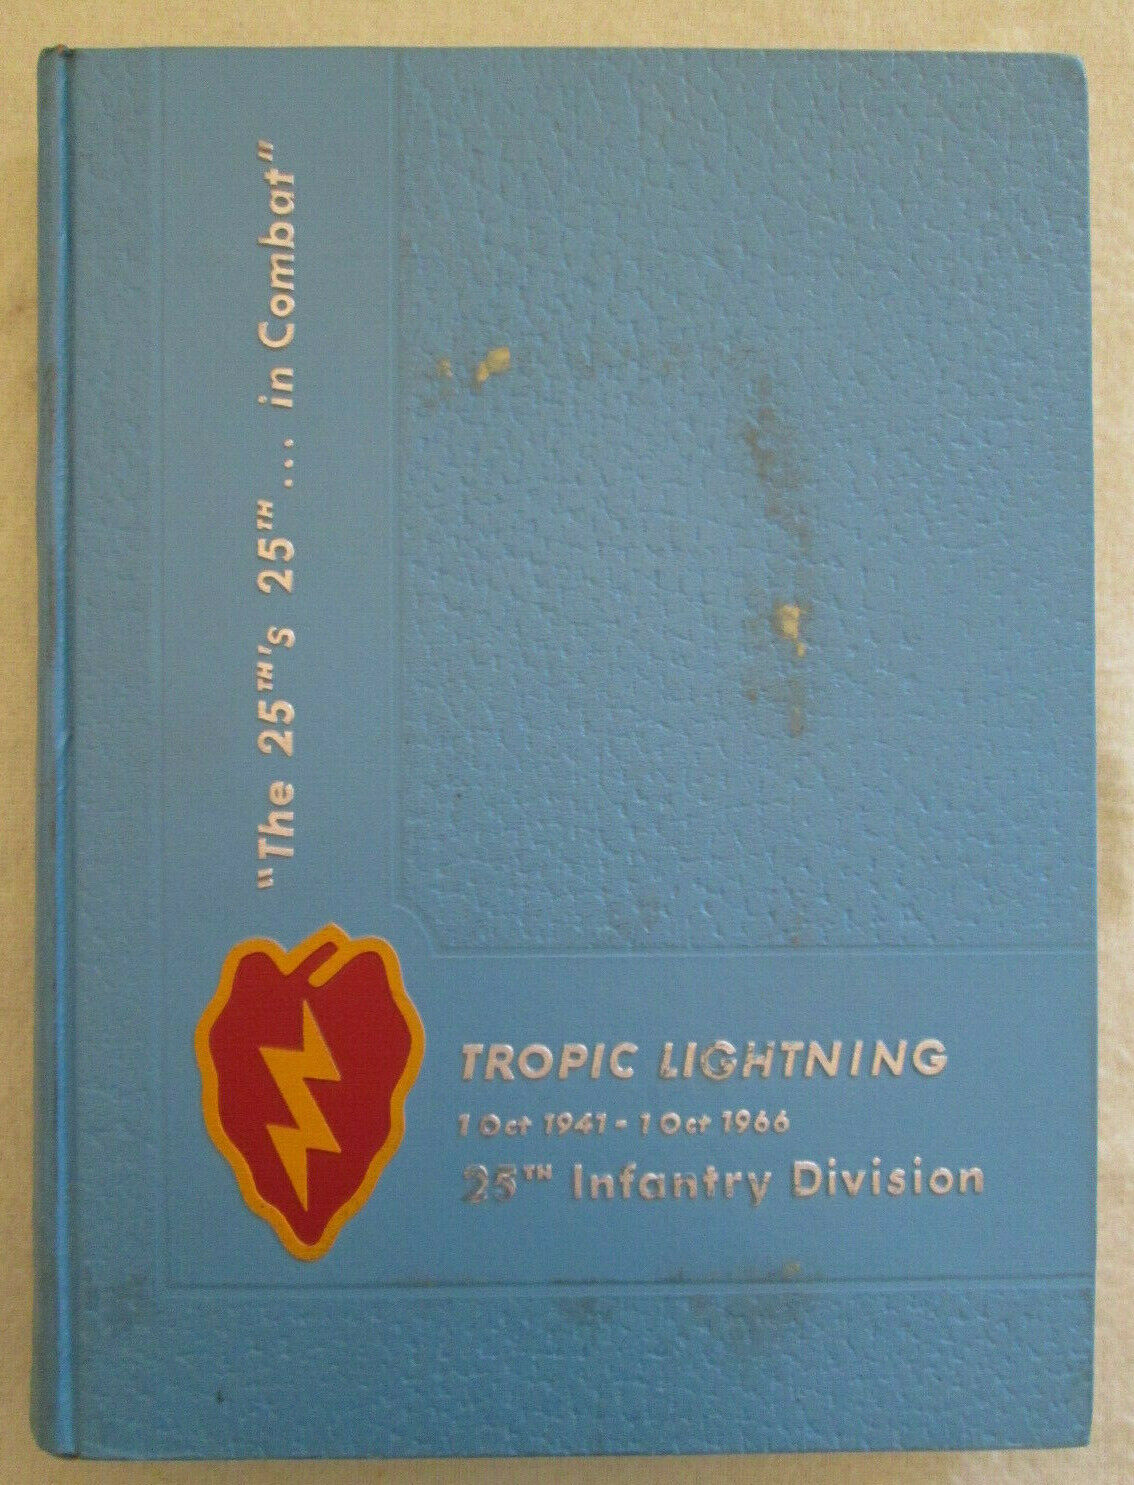 "tropic Lightning, 1 Oct 1941 - 1 Oct 1966, 25th Infantry Division" Book/roster